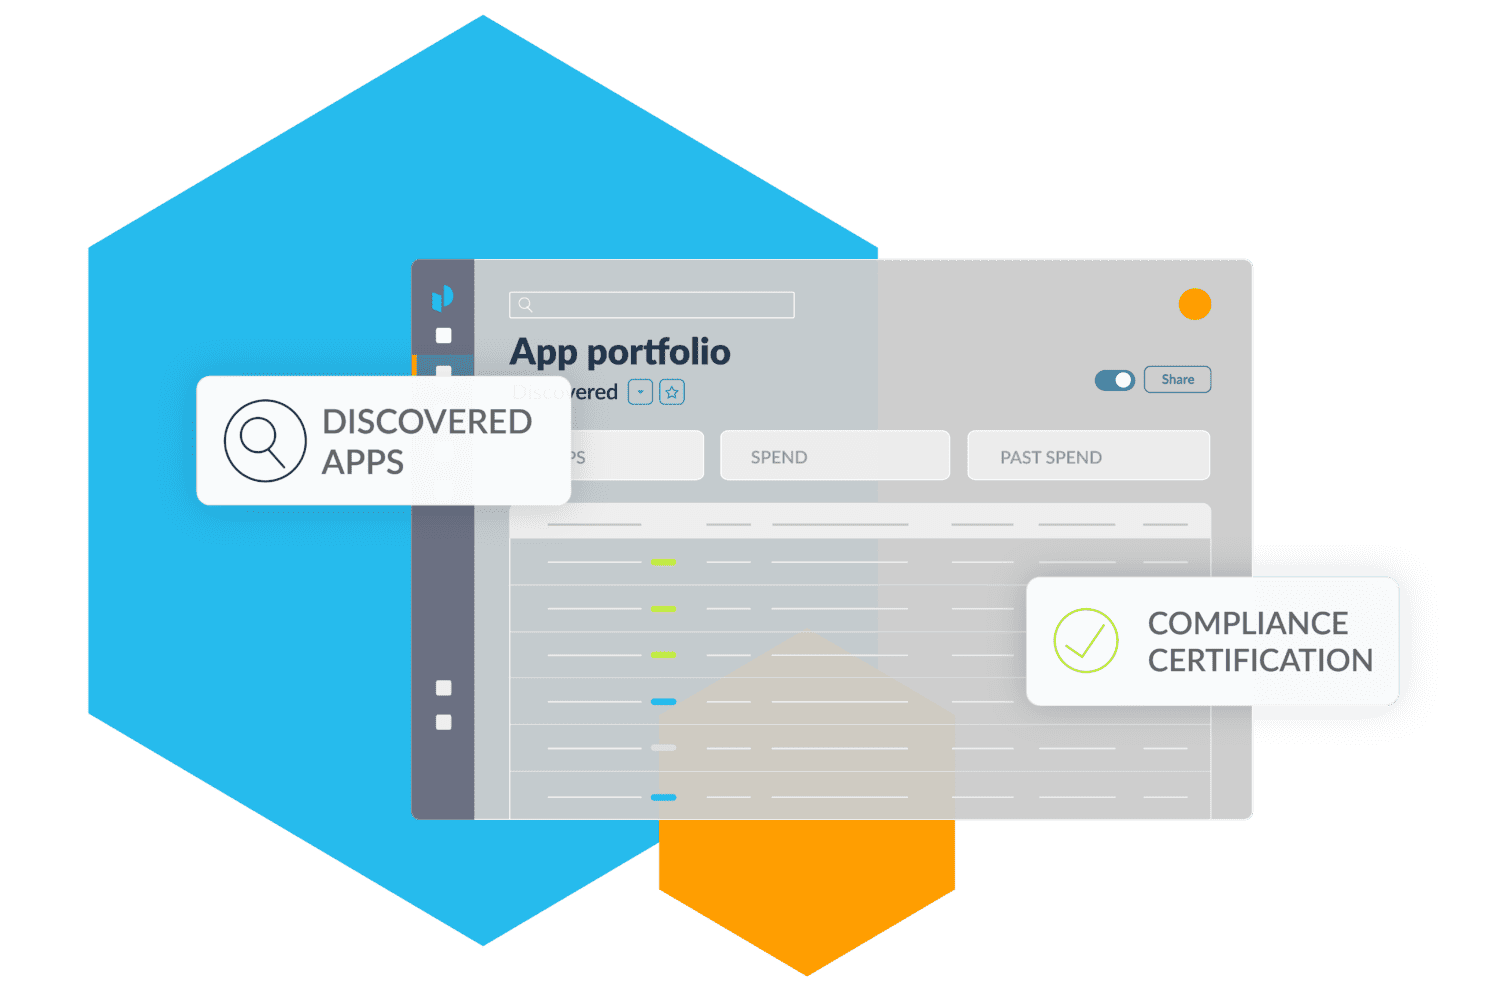 App portfolio showing the number of discovered apps and if they have compliance certification